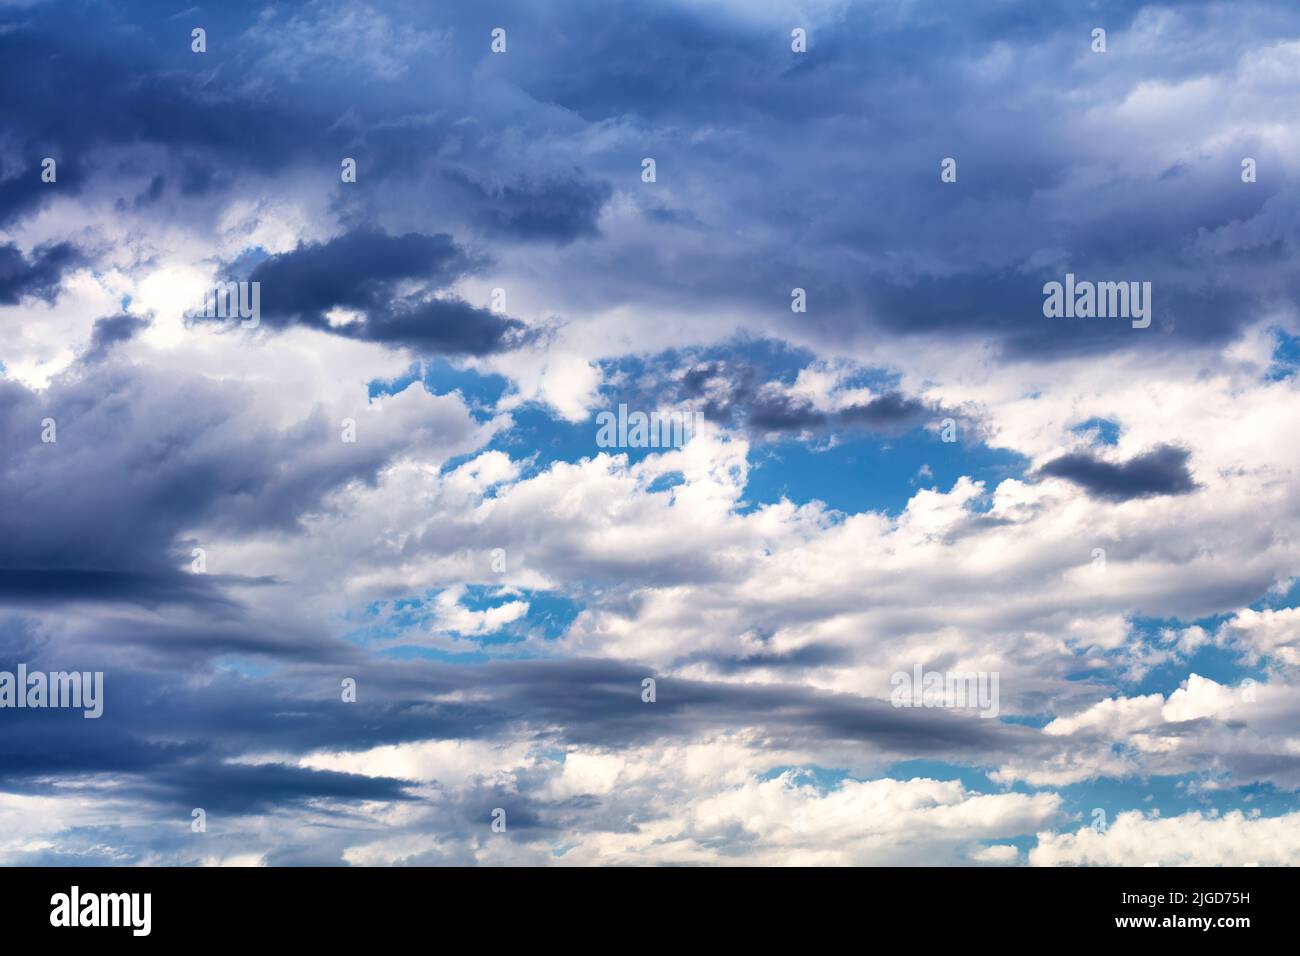 Blue sky and cloud background showing a possible storm Stock Photo